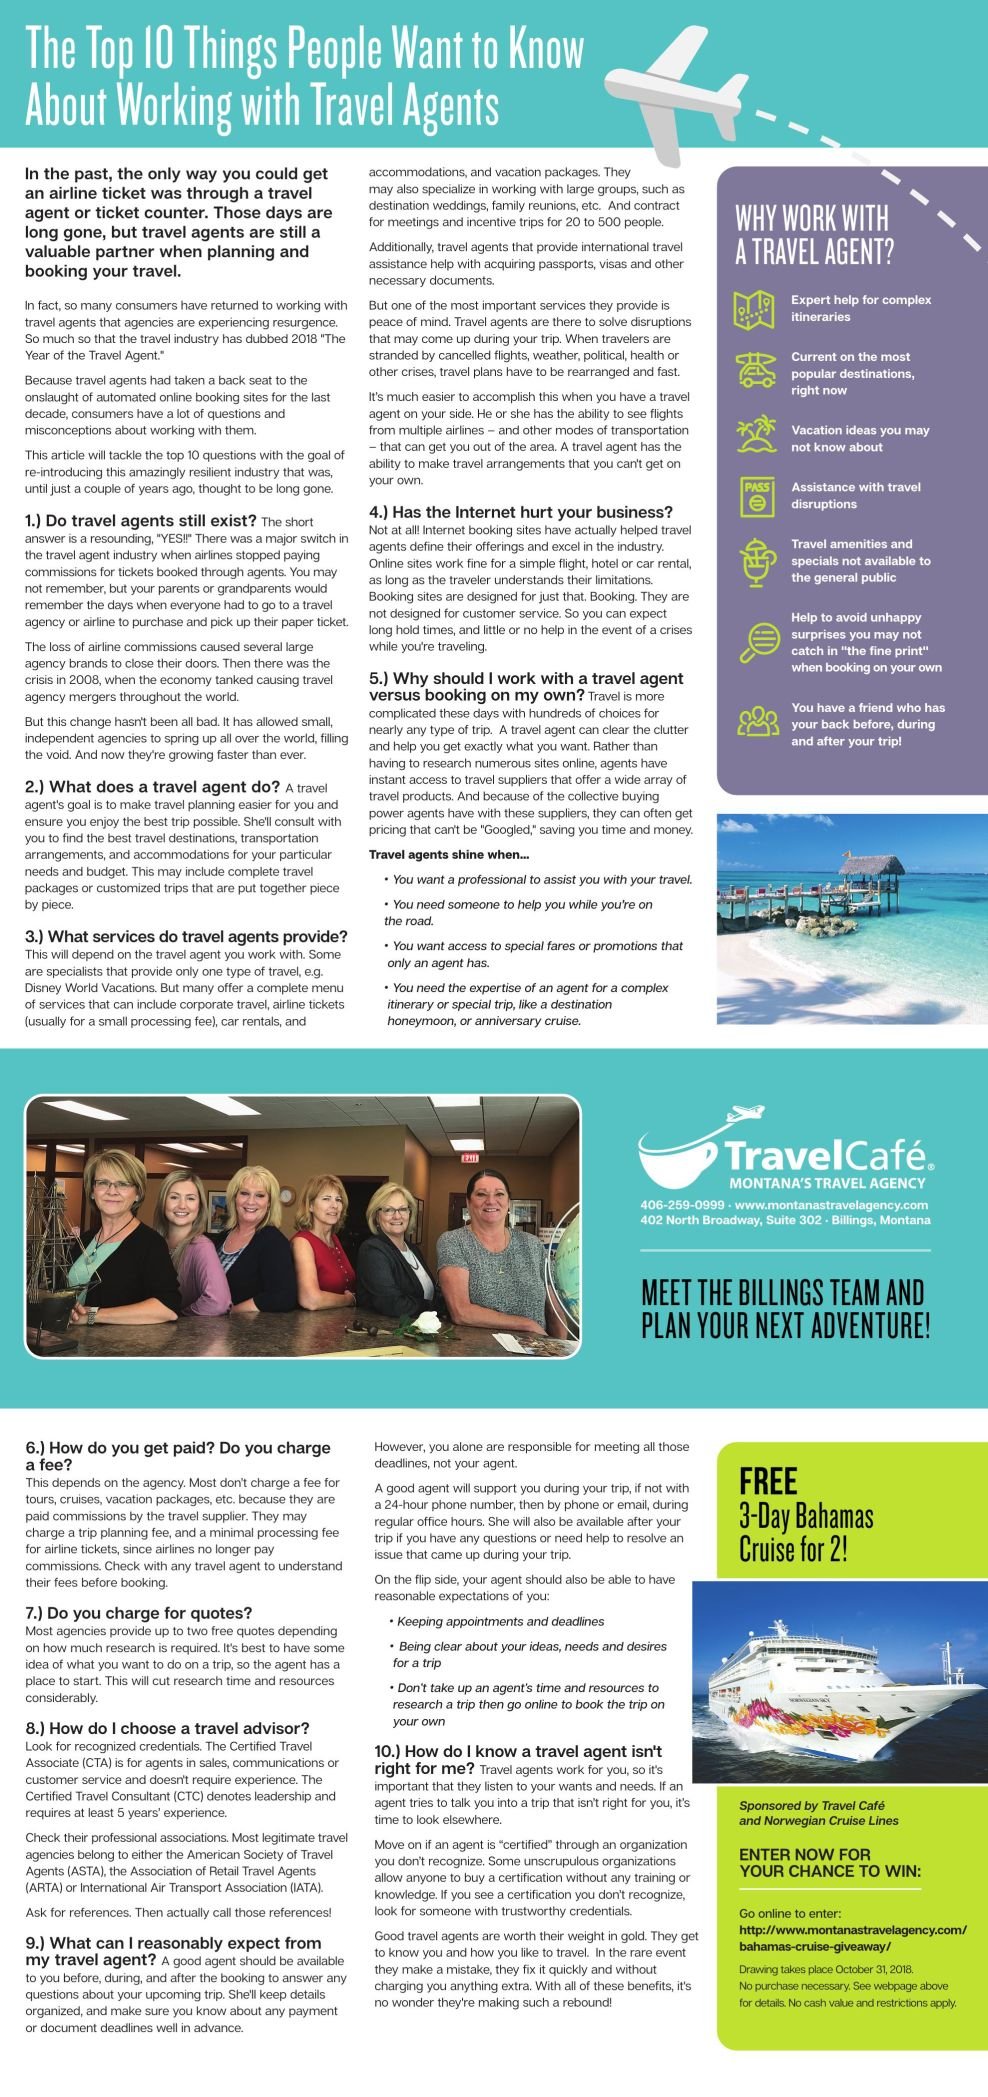 Are Travel Agents Still a Thing? Find Out Why People Still Choose Travel Agents